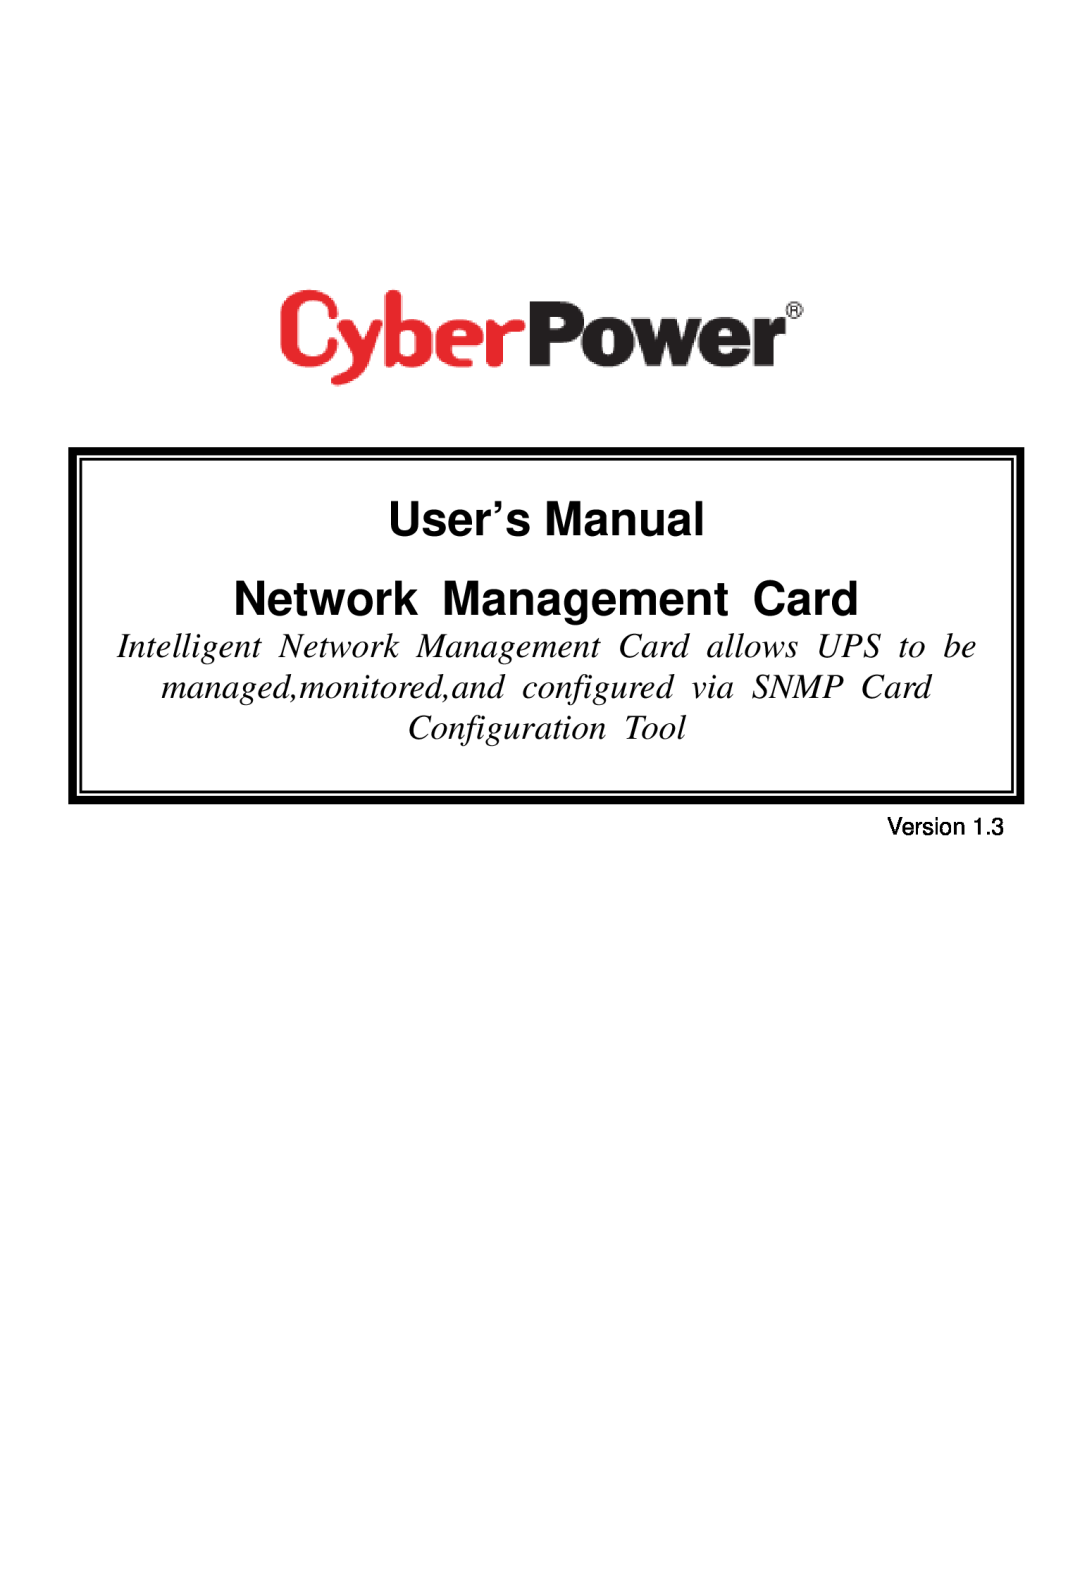 CyberPower Systems user manual User’s Manual Network Management Card 